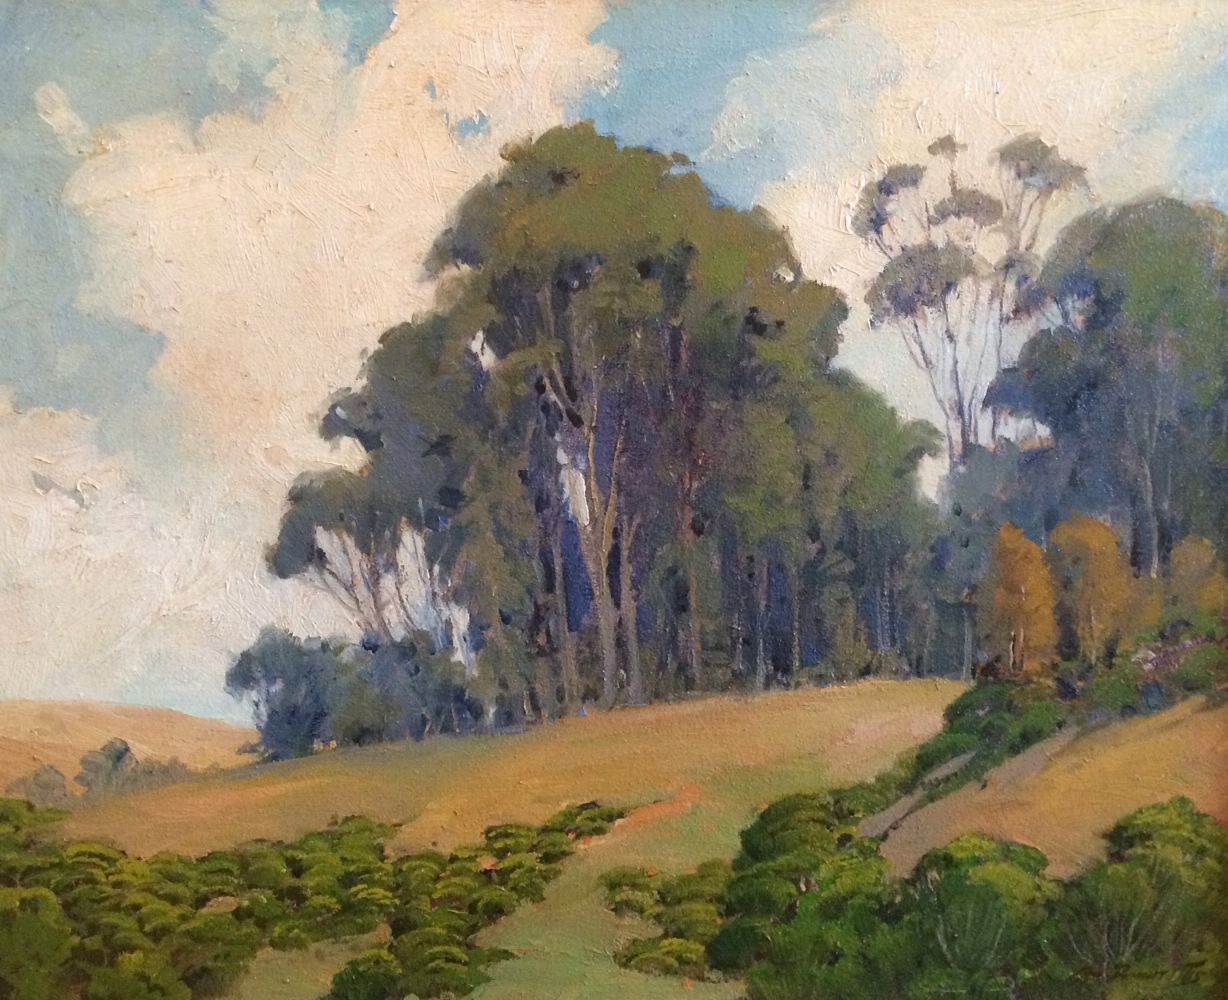 GEORGE DEMONT OTIS - "Glory of a Sunny Day" - Oil on Canvas - 24" x 30"